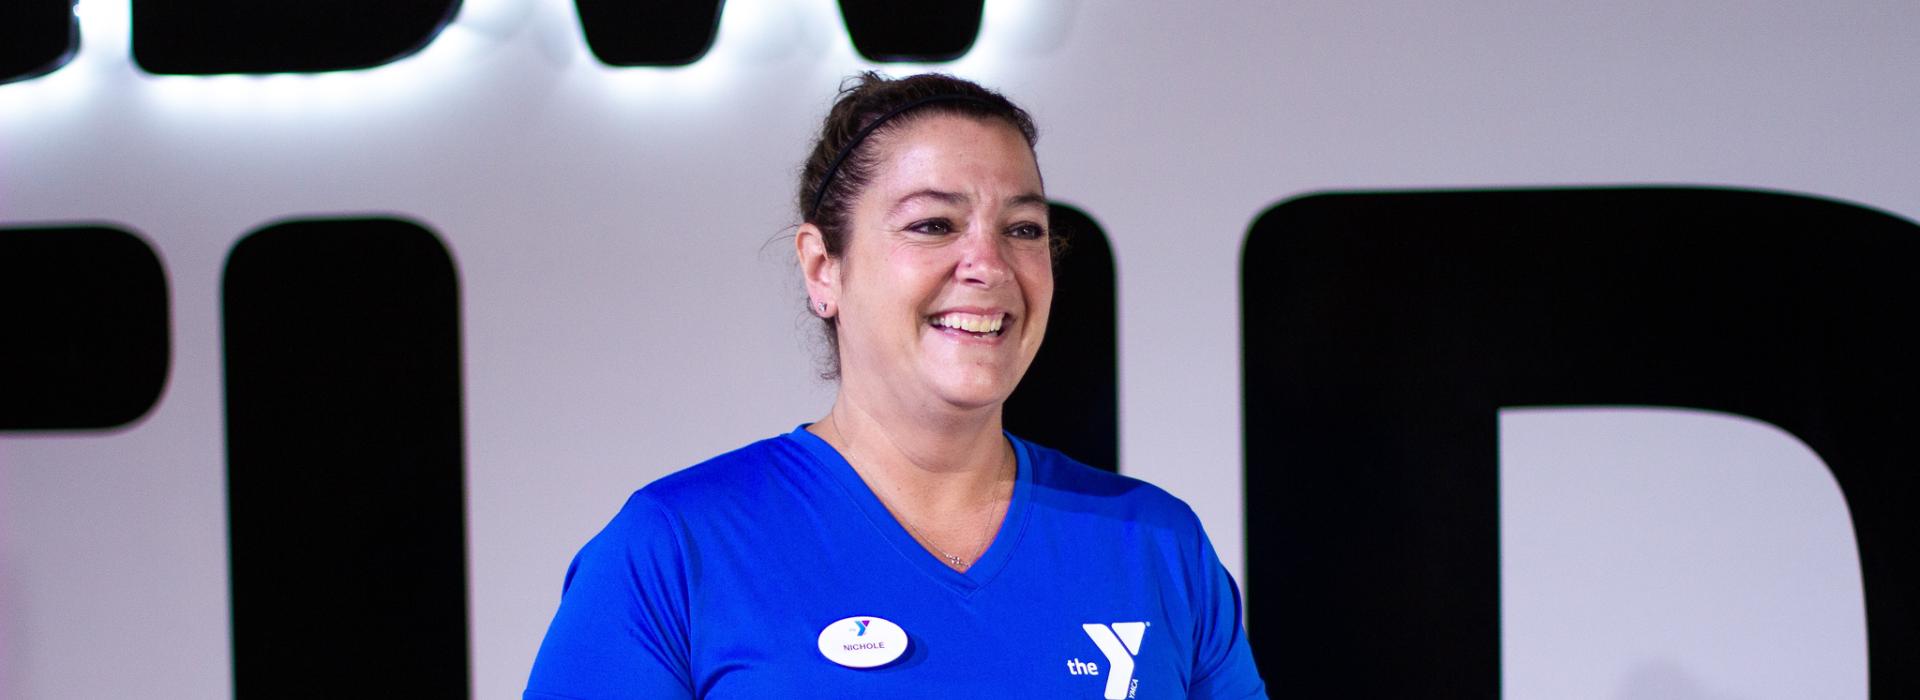 Nichole, Personal Trainer at the YMCA of Greater Brandywine, is ready to help support your exercise goals.